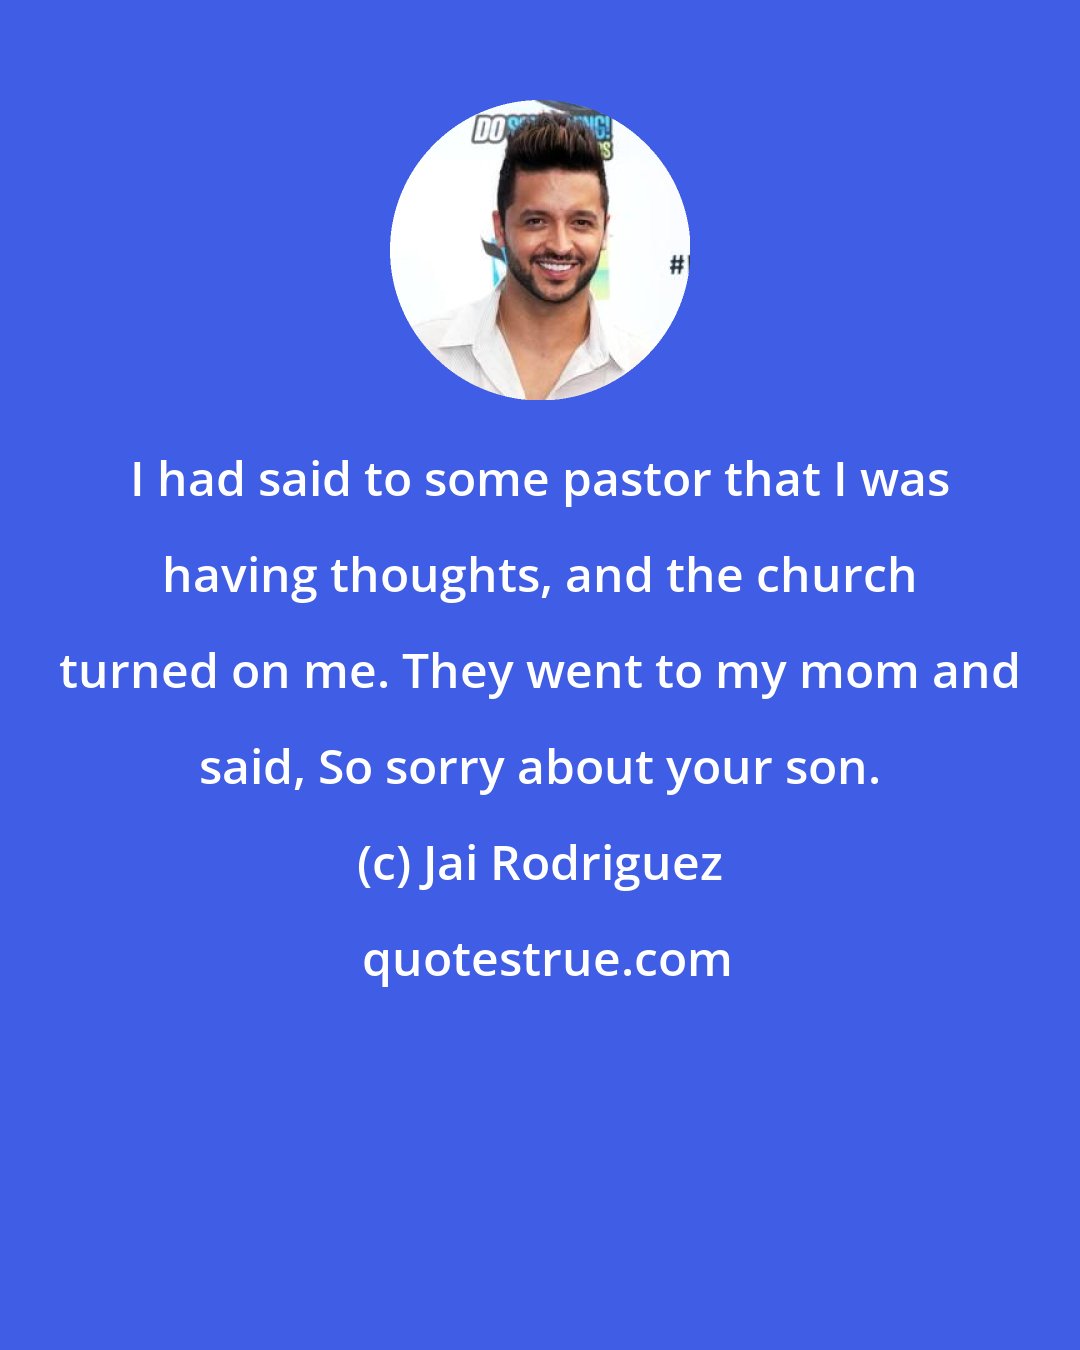 Jai Rodriguez: I had said to some pastor that I was having thoughts, and the church turned on me. They went to my mom and said, So sorry about your son.